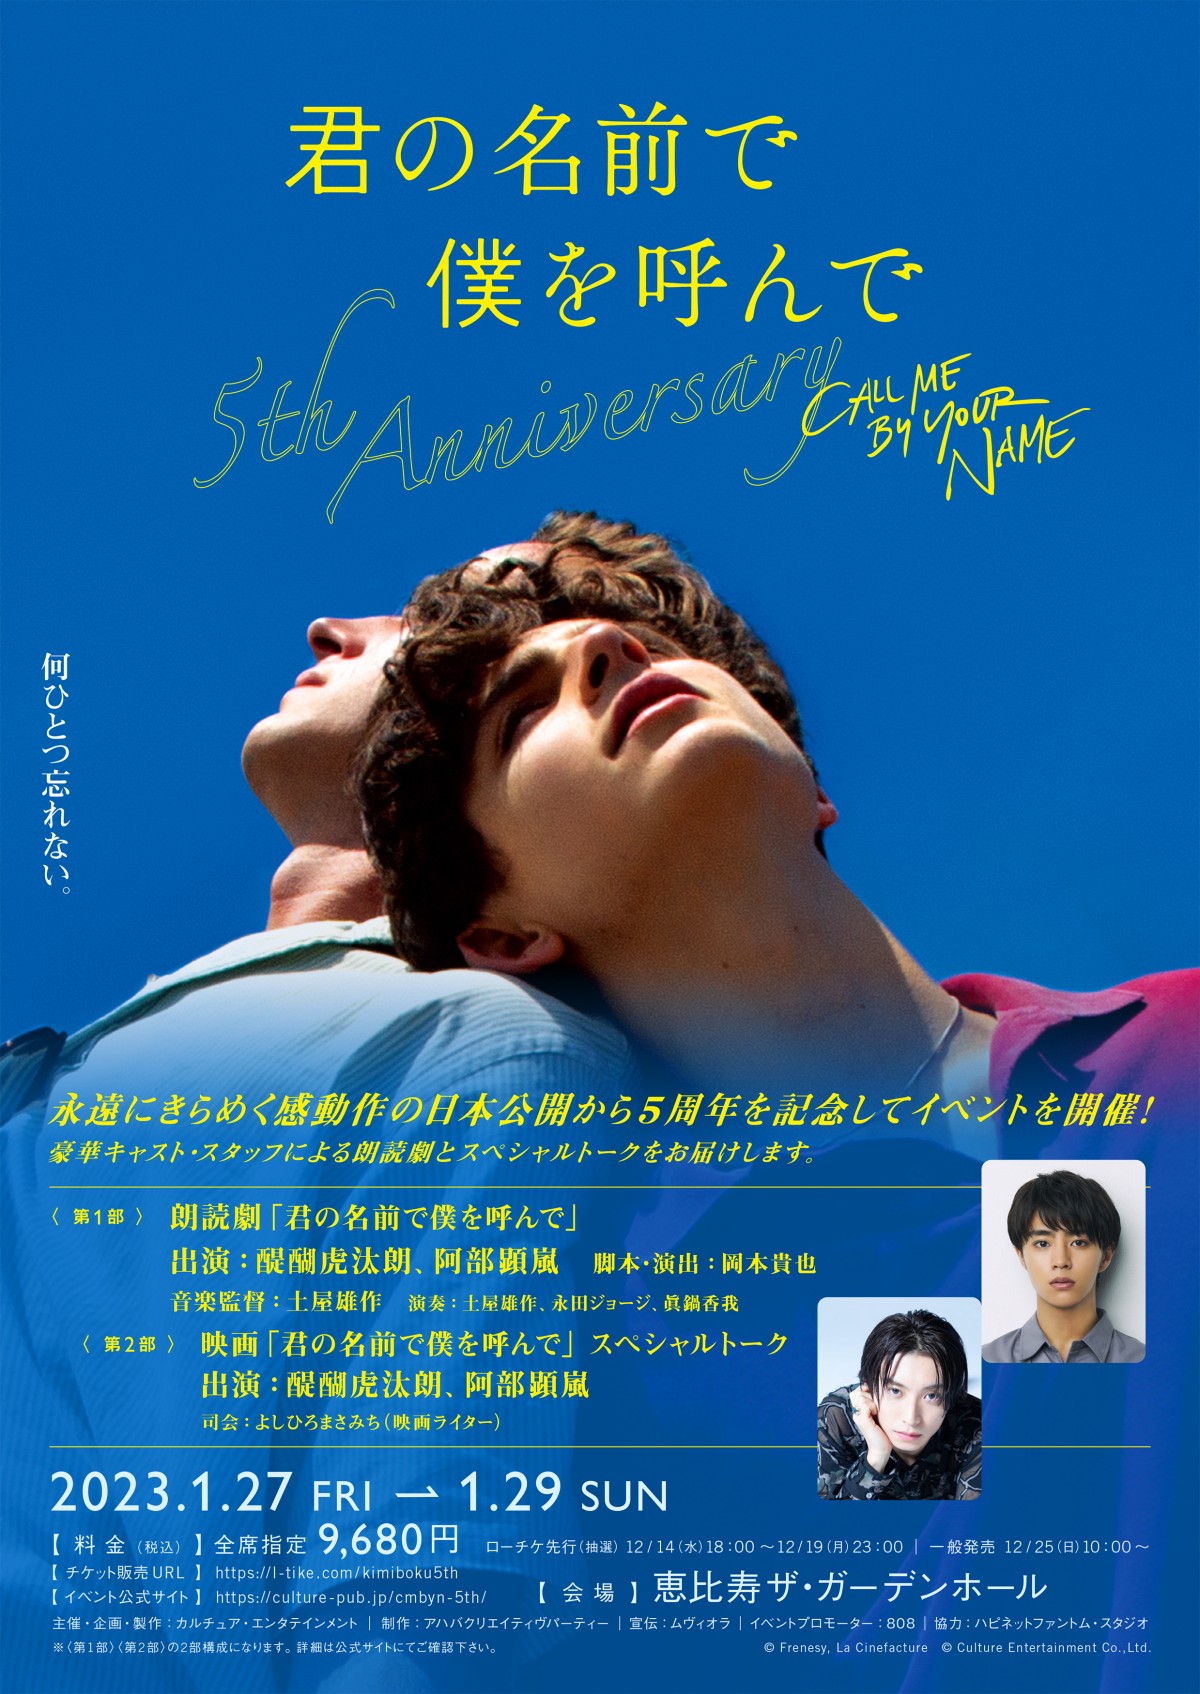 Call me by your name 君の名前で僕を呼んで 原作本 洋書 - 洋書